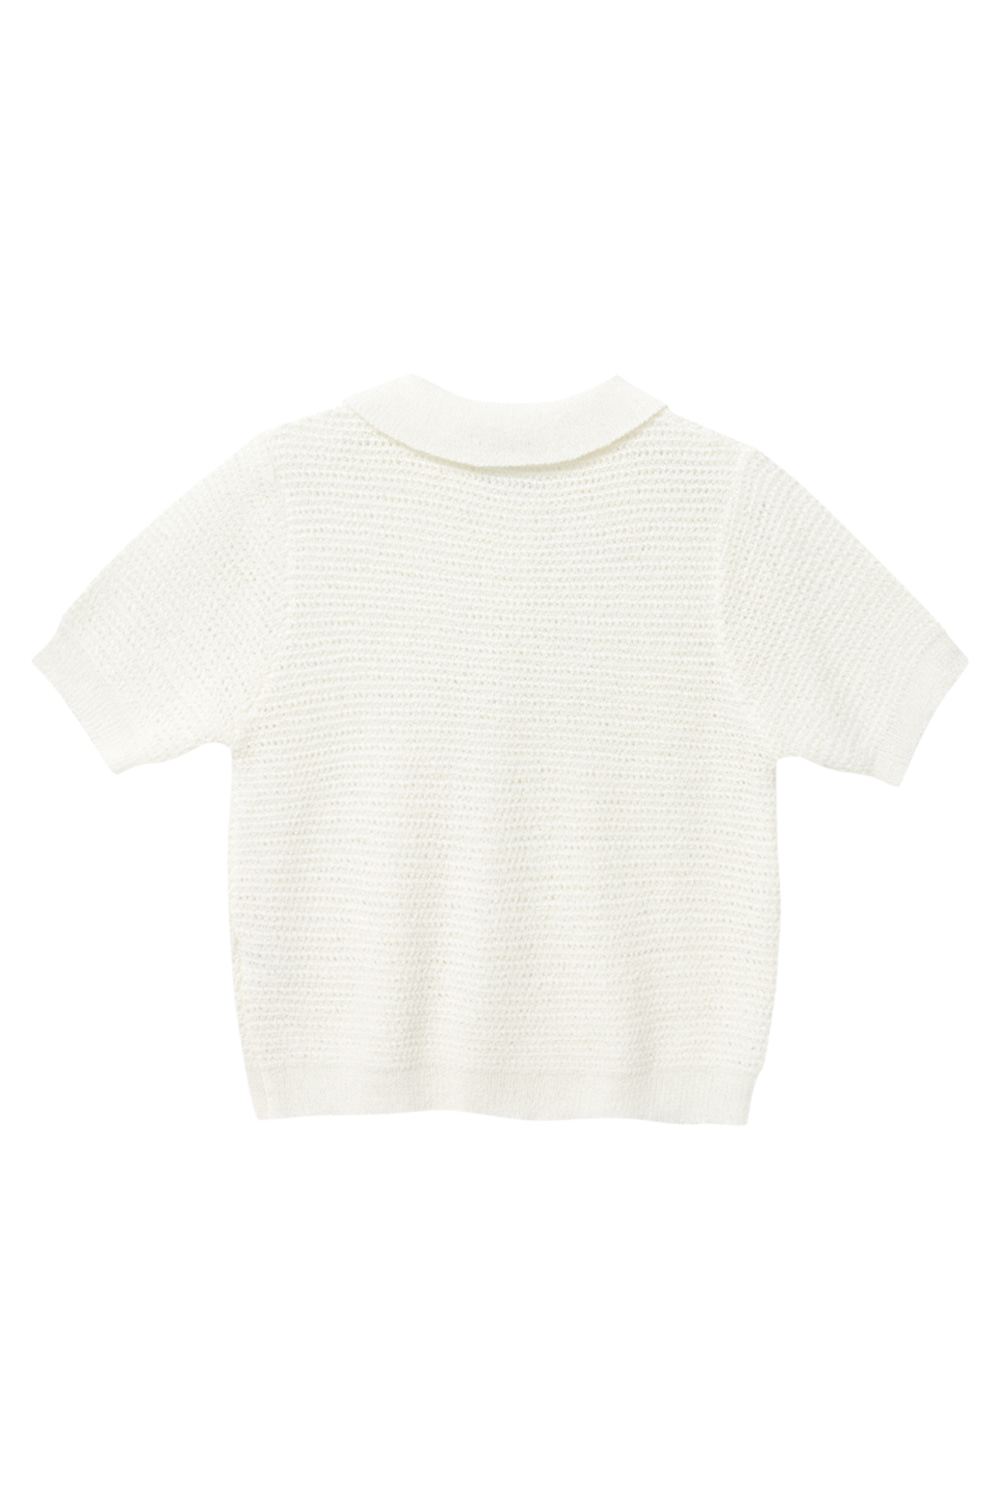 Classic Collar Knit Top Short Sleeve (Ivory)